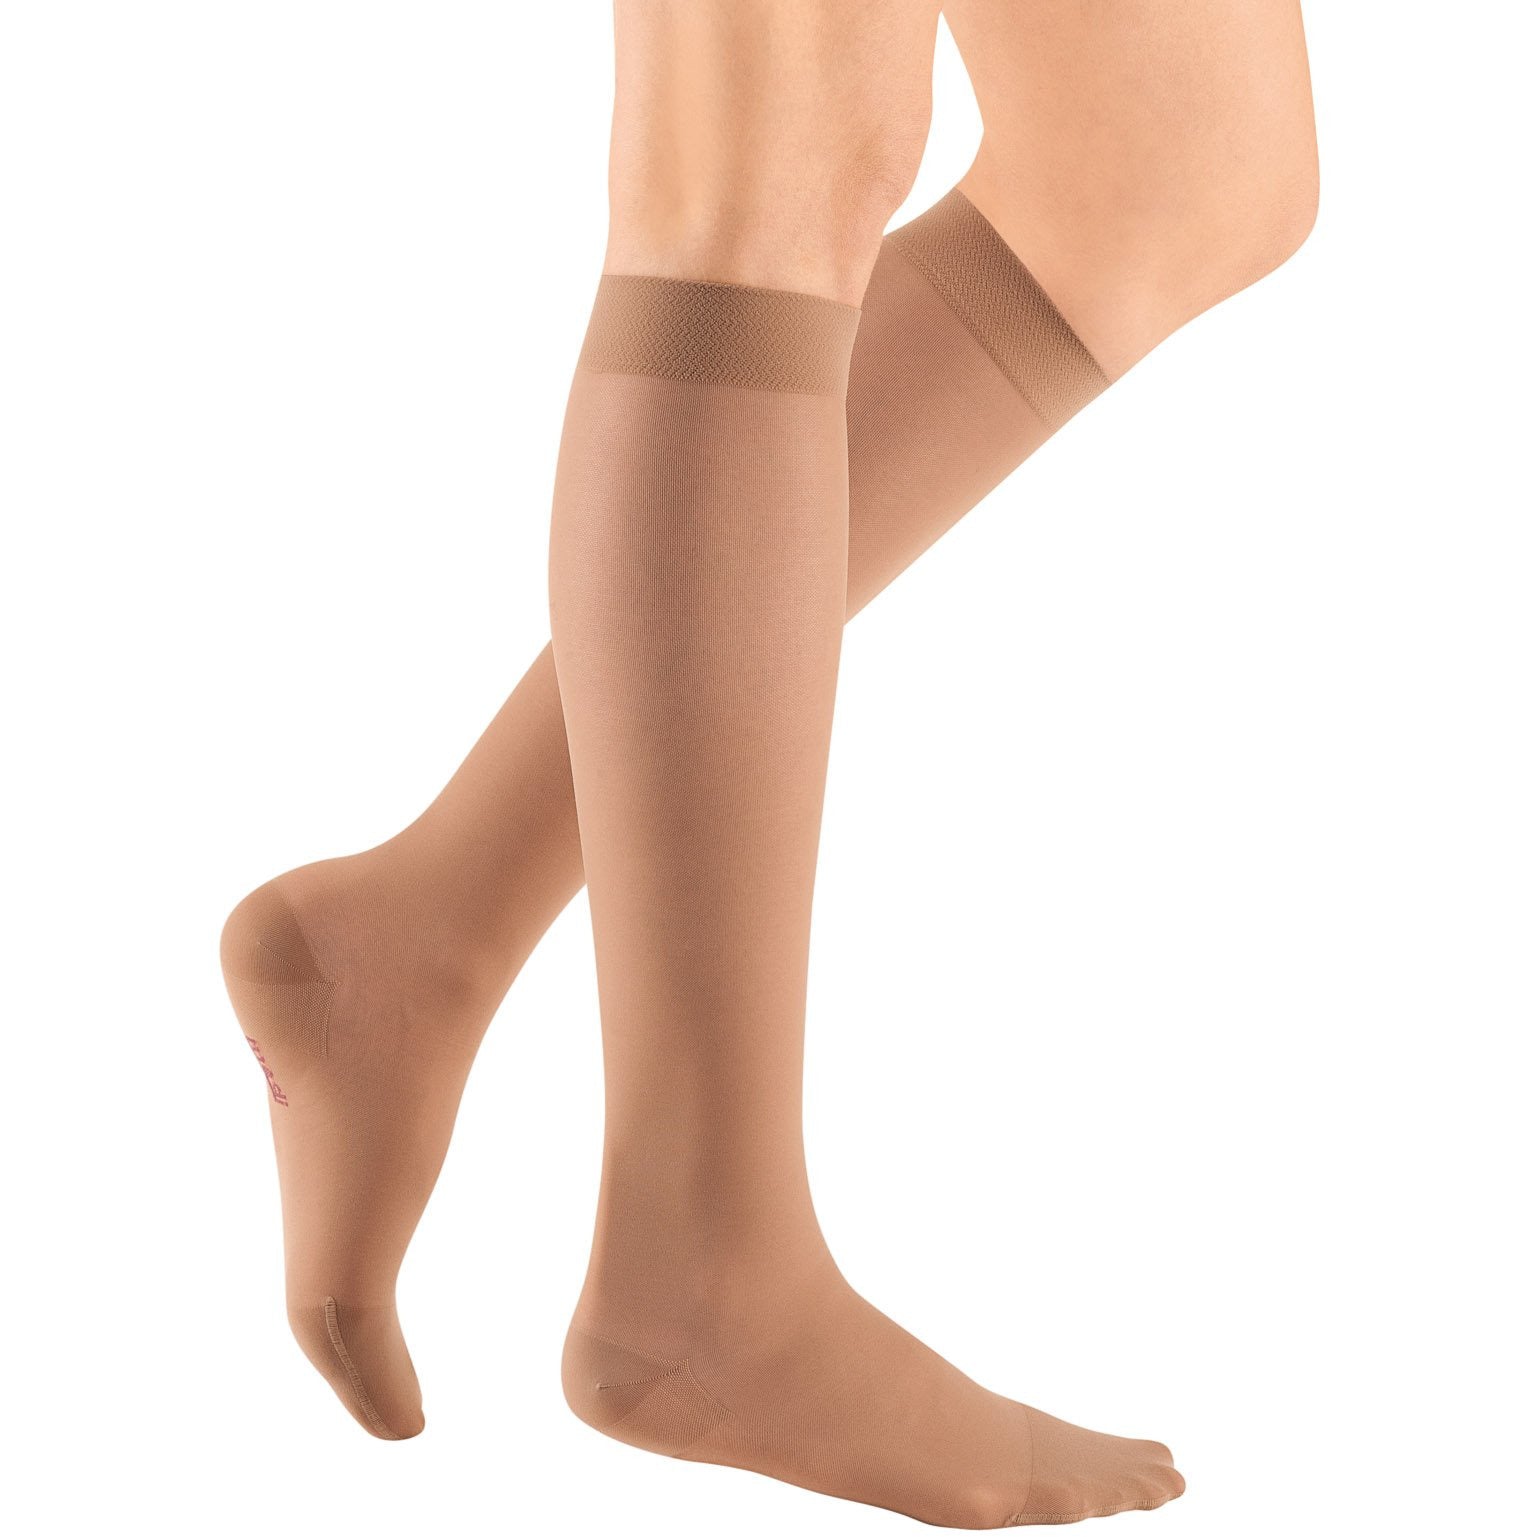 Compression Stocking Varicose Vein Stocks Translucent Unisex 15-20Mm Hg  Highly Elastic Breathable Best for Varicose Veins Edema Swelling 1  Pair,Flesh,M (Flesh M) : : Health & Personal Care